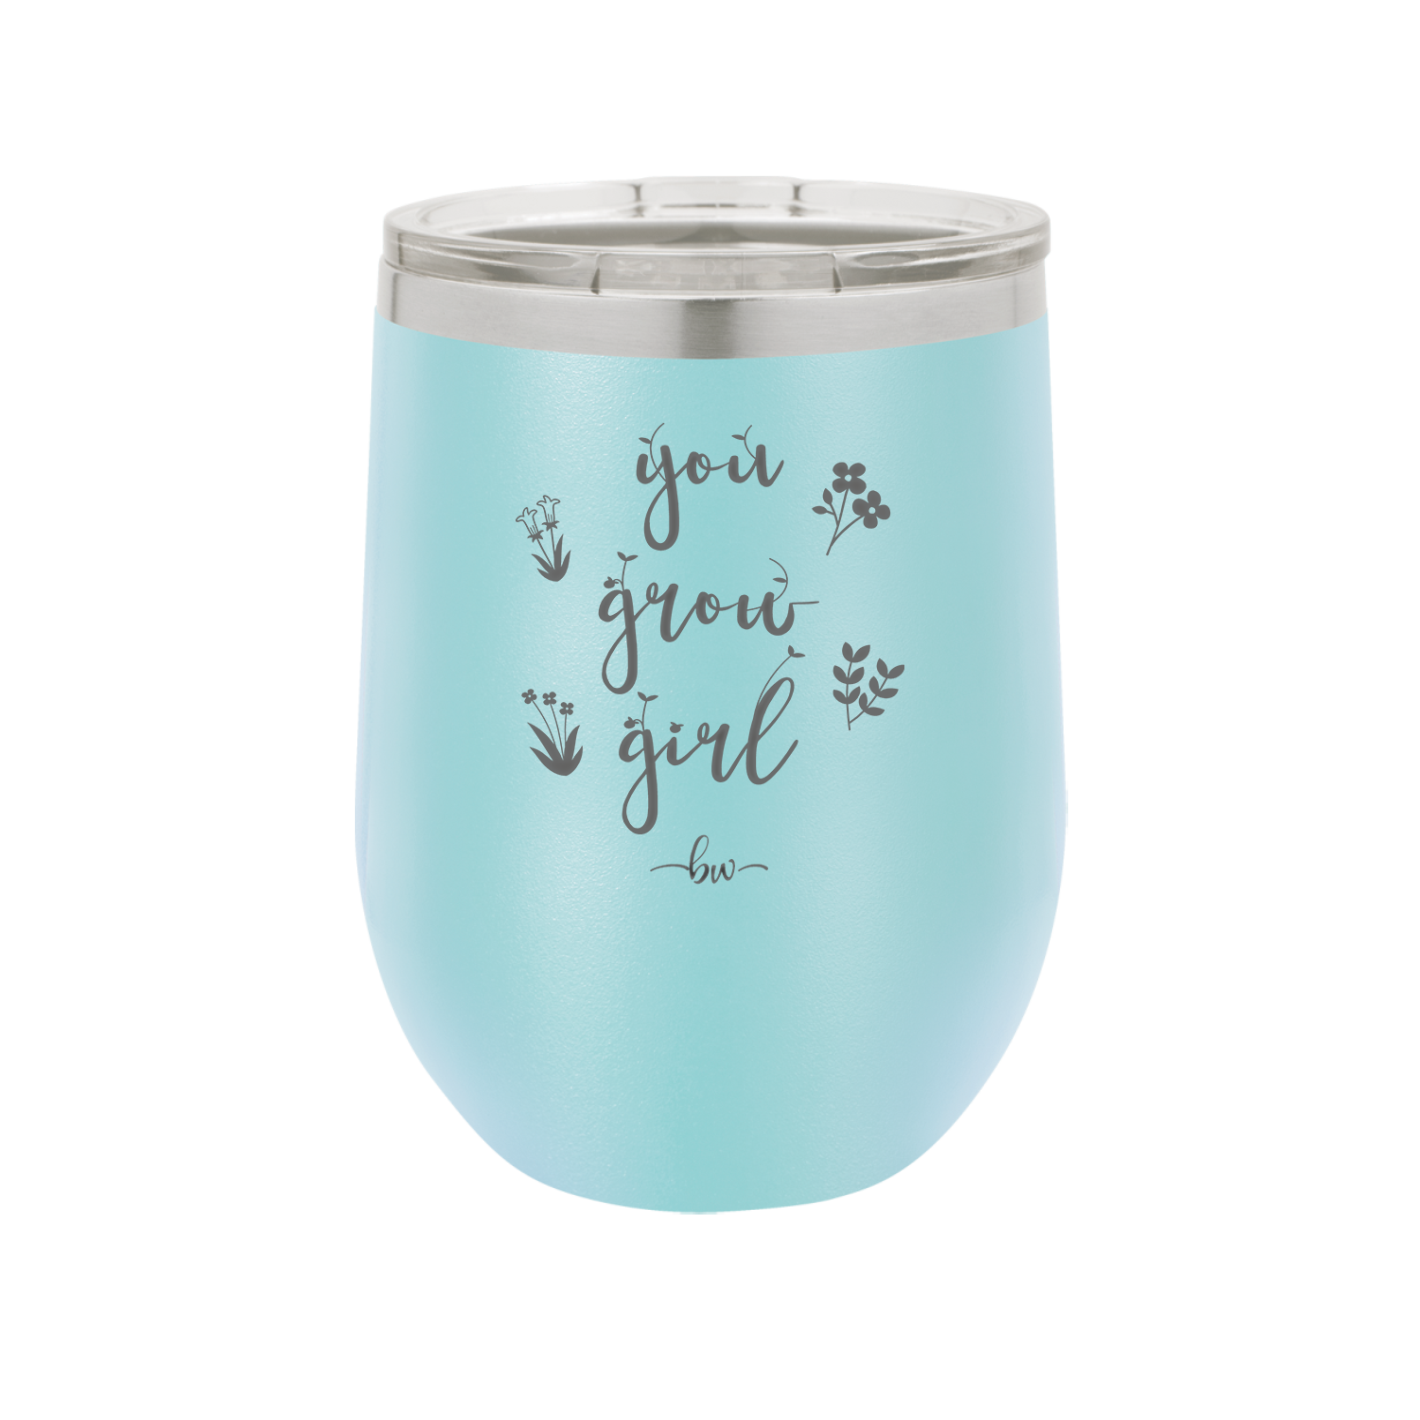 You Grow Girl - Laser Engraved Stainless Steel Drinkware - 2070 -